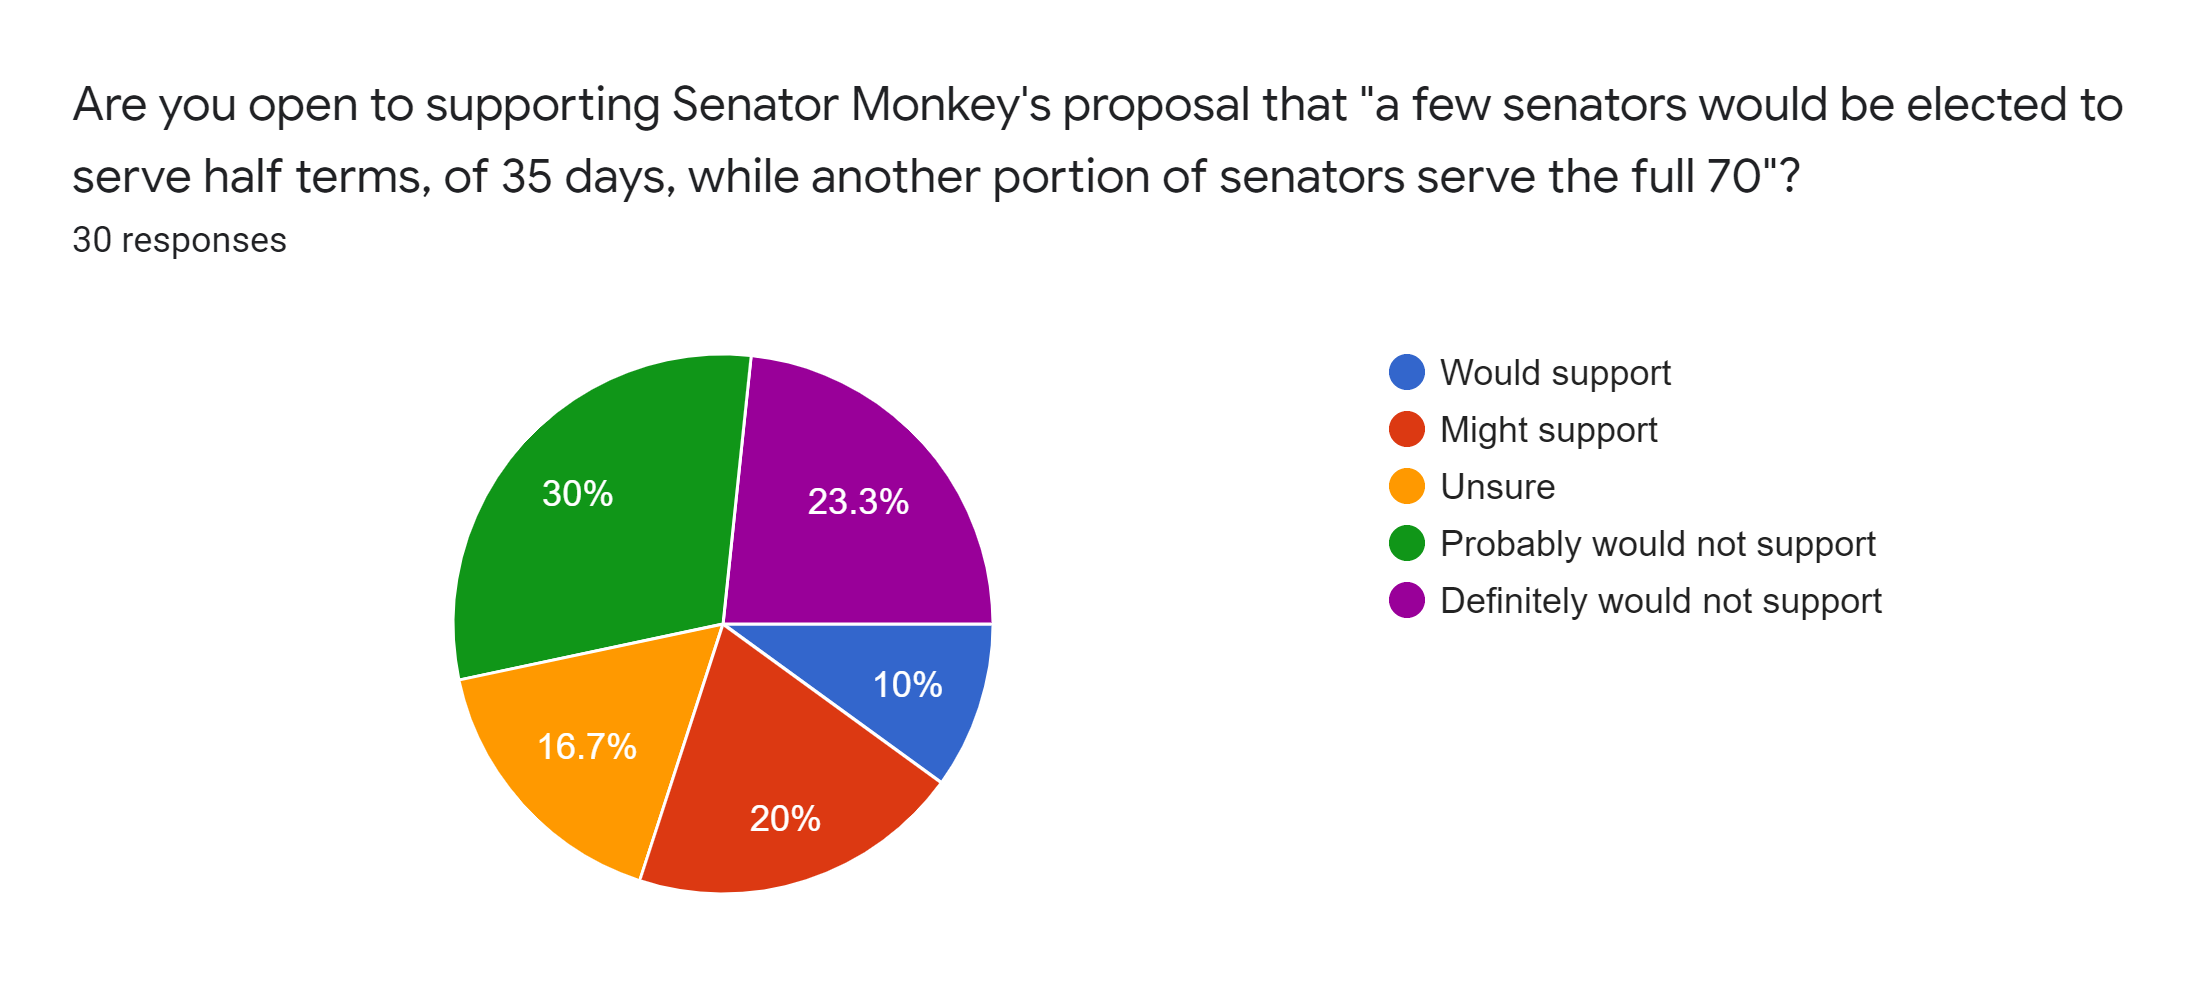 Forms response chart. Question title: Are you open to supporting Senator Monkey's proposal that a few senators would be elected to serve half terms, of 35 days, while another portion of senators serve the full 70?. Number of responses: 30 responses.